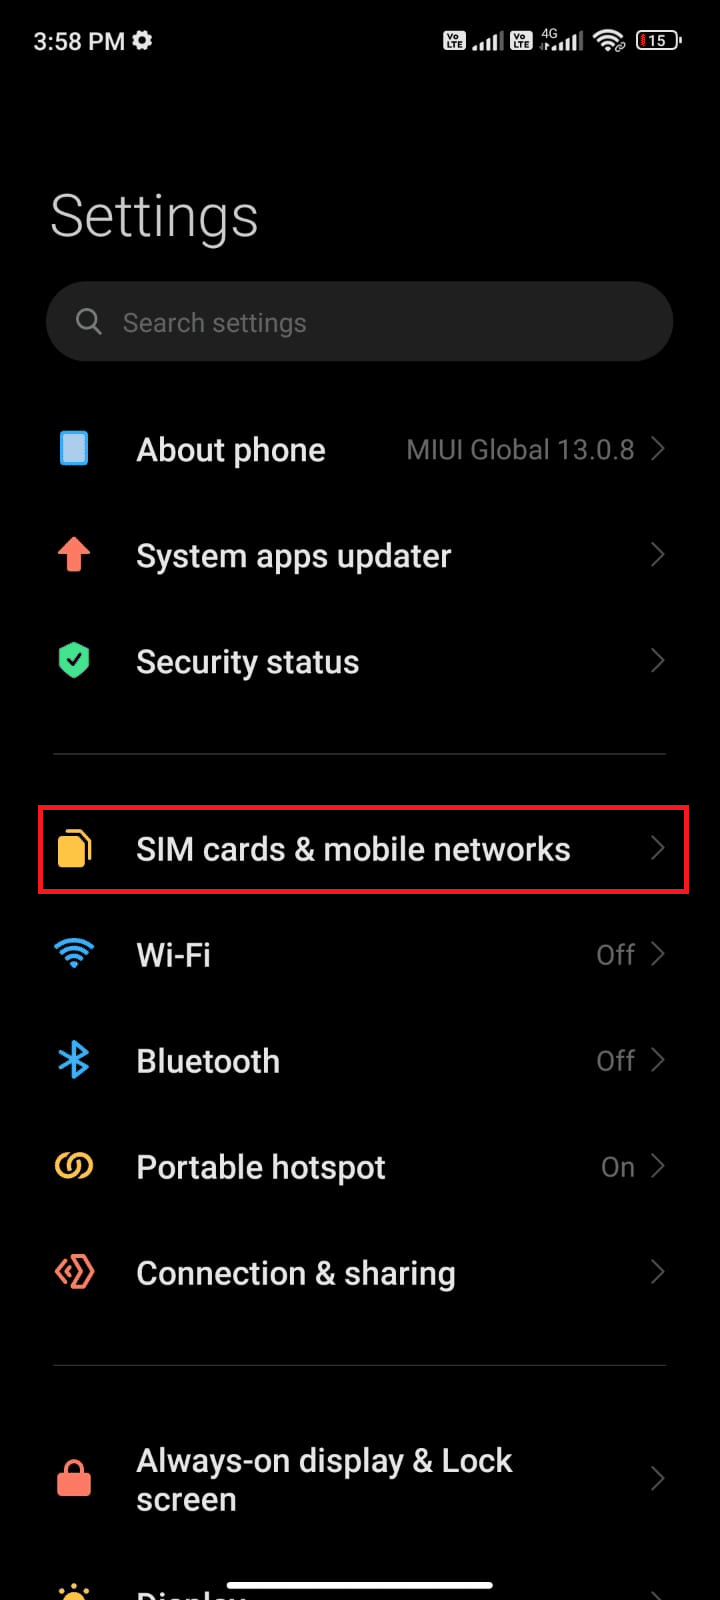 tap the SIM cards mobile networks option. Fix Google Play Store Error Code 403